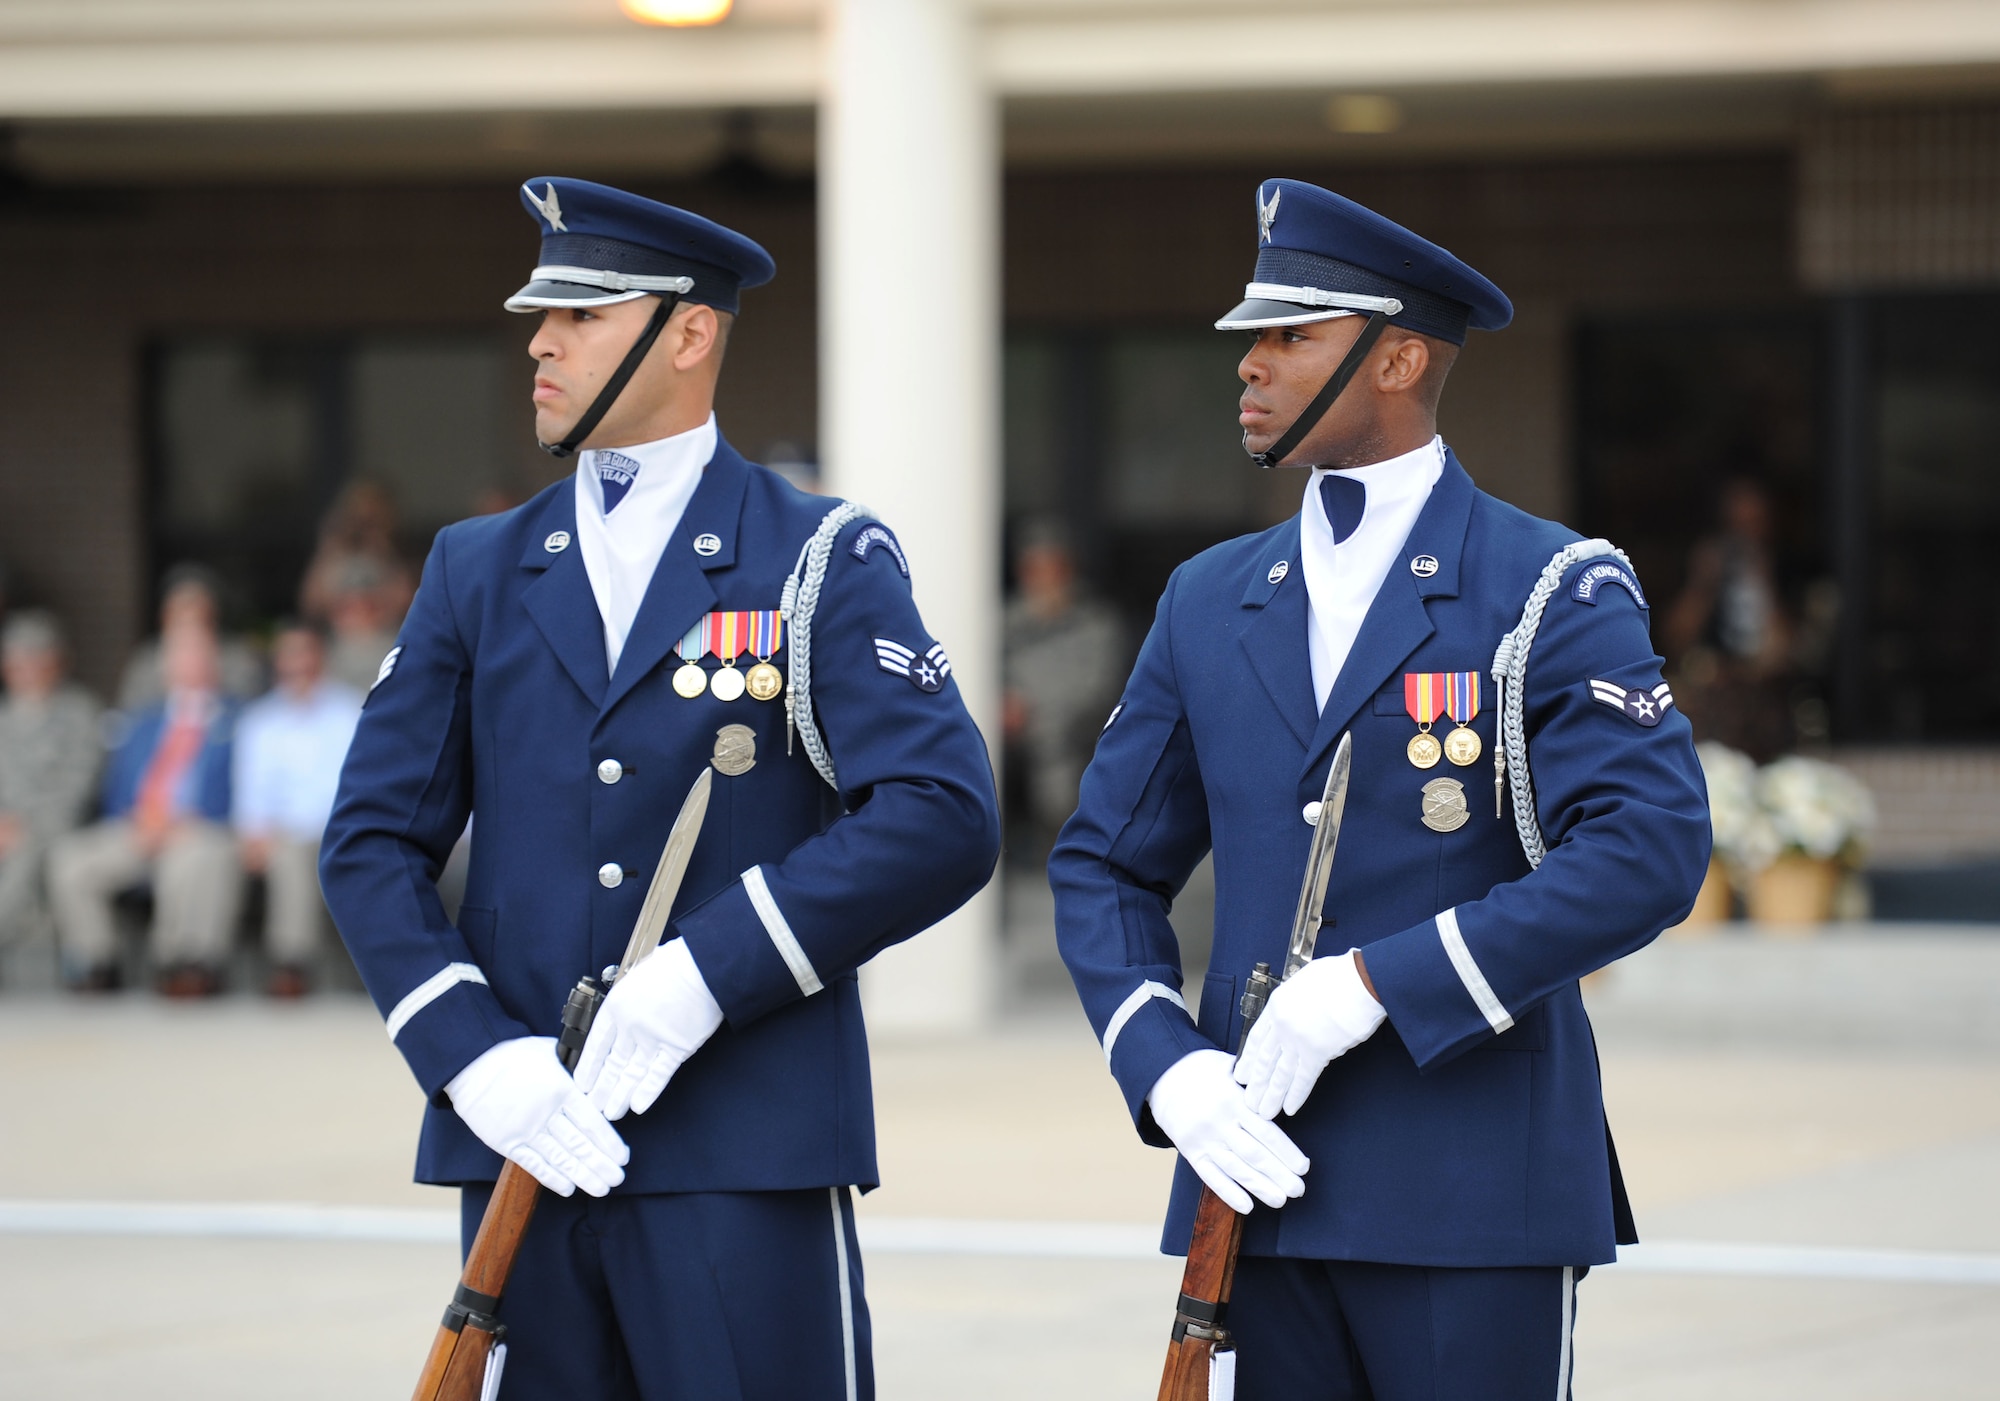 Senior Airman Ryan Garrido and Airman 1st Class Nigel Jaggard, U.S. Air Force Honor Guard Drill Team members, debut their 2017 routine during the 81st Training Group drill down at the Levitow Training Support Facility drill pad March 10, 2017, on Keesler Air Force Base, Miss. The team comes to Keesler every year for five weeks to develop a new routine that they will use throughout the year. (U.S. Air Force photo by Kemberly Groue)